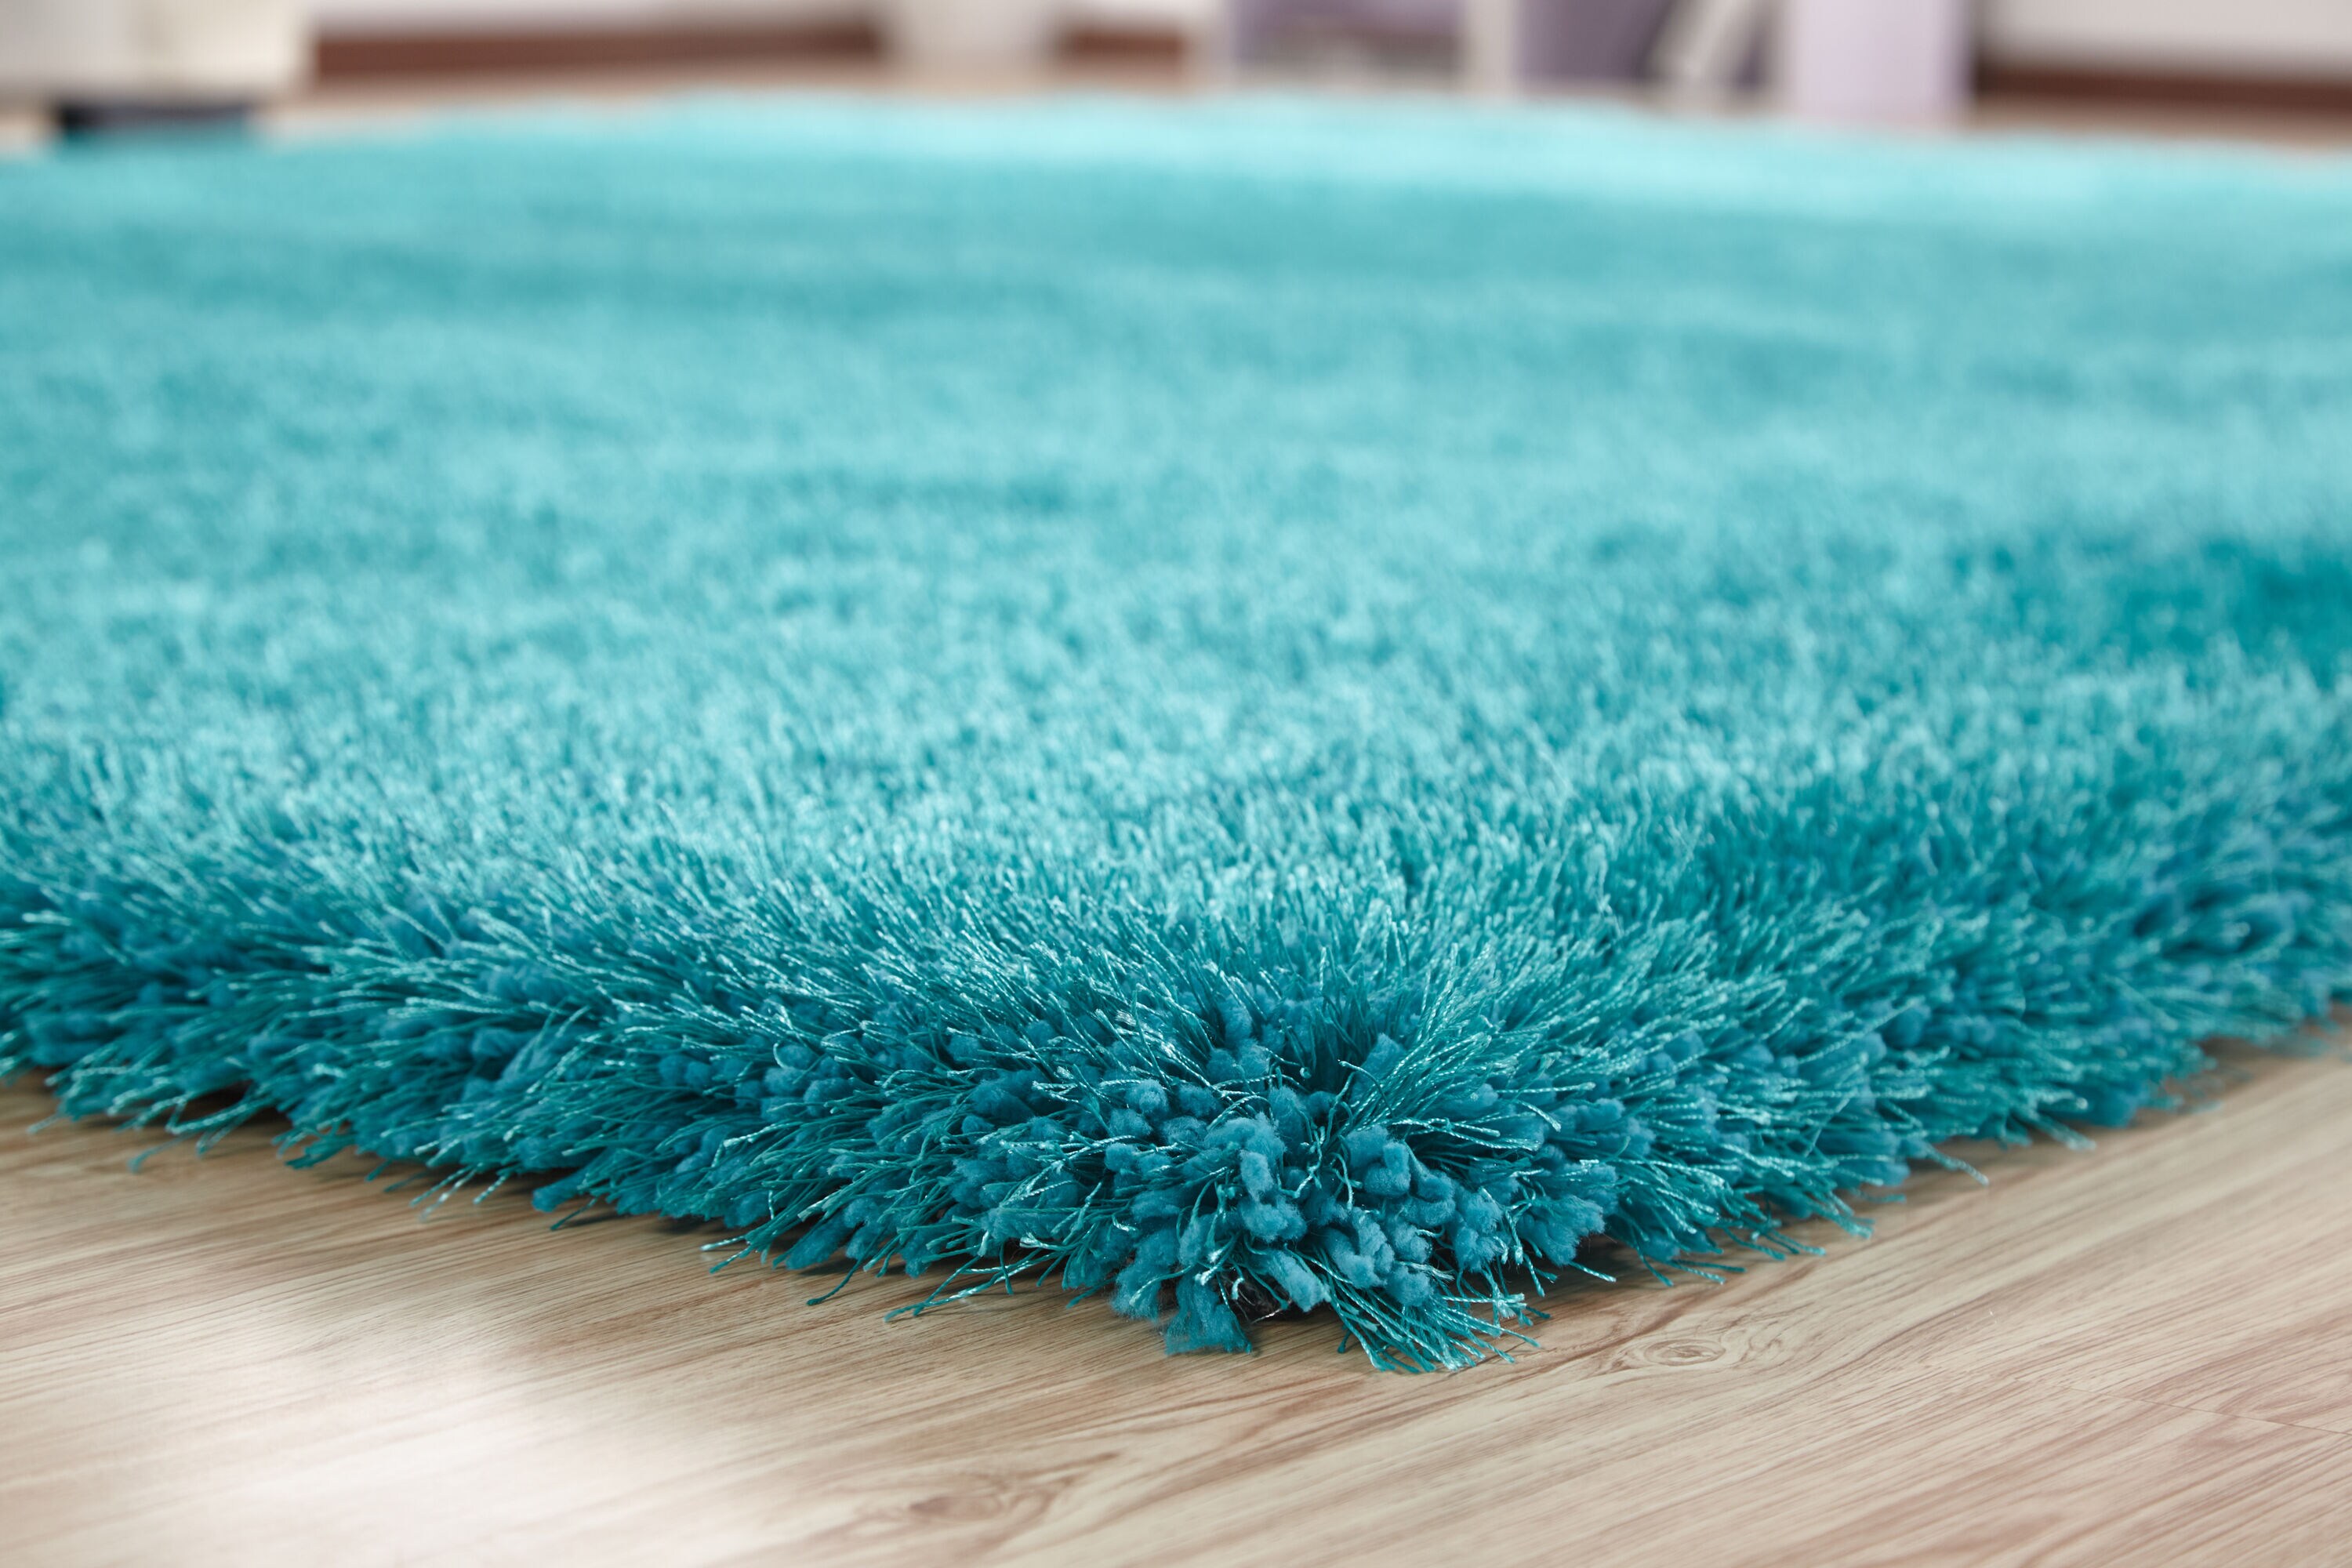 Buy Solid Shag 6 Ft Round Rug Turquoise